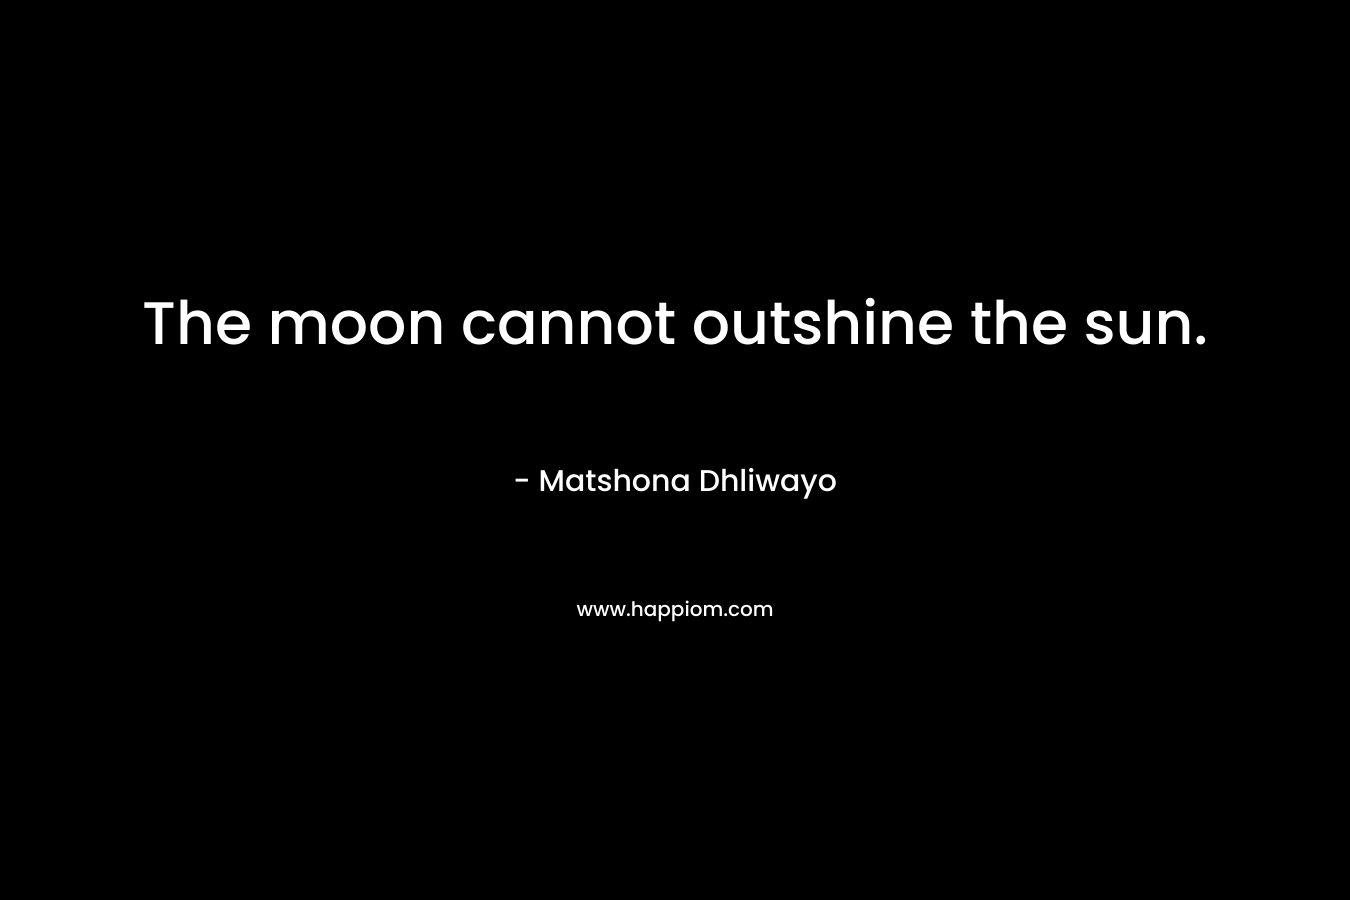 The moon cannot outshine the sun.